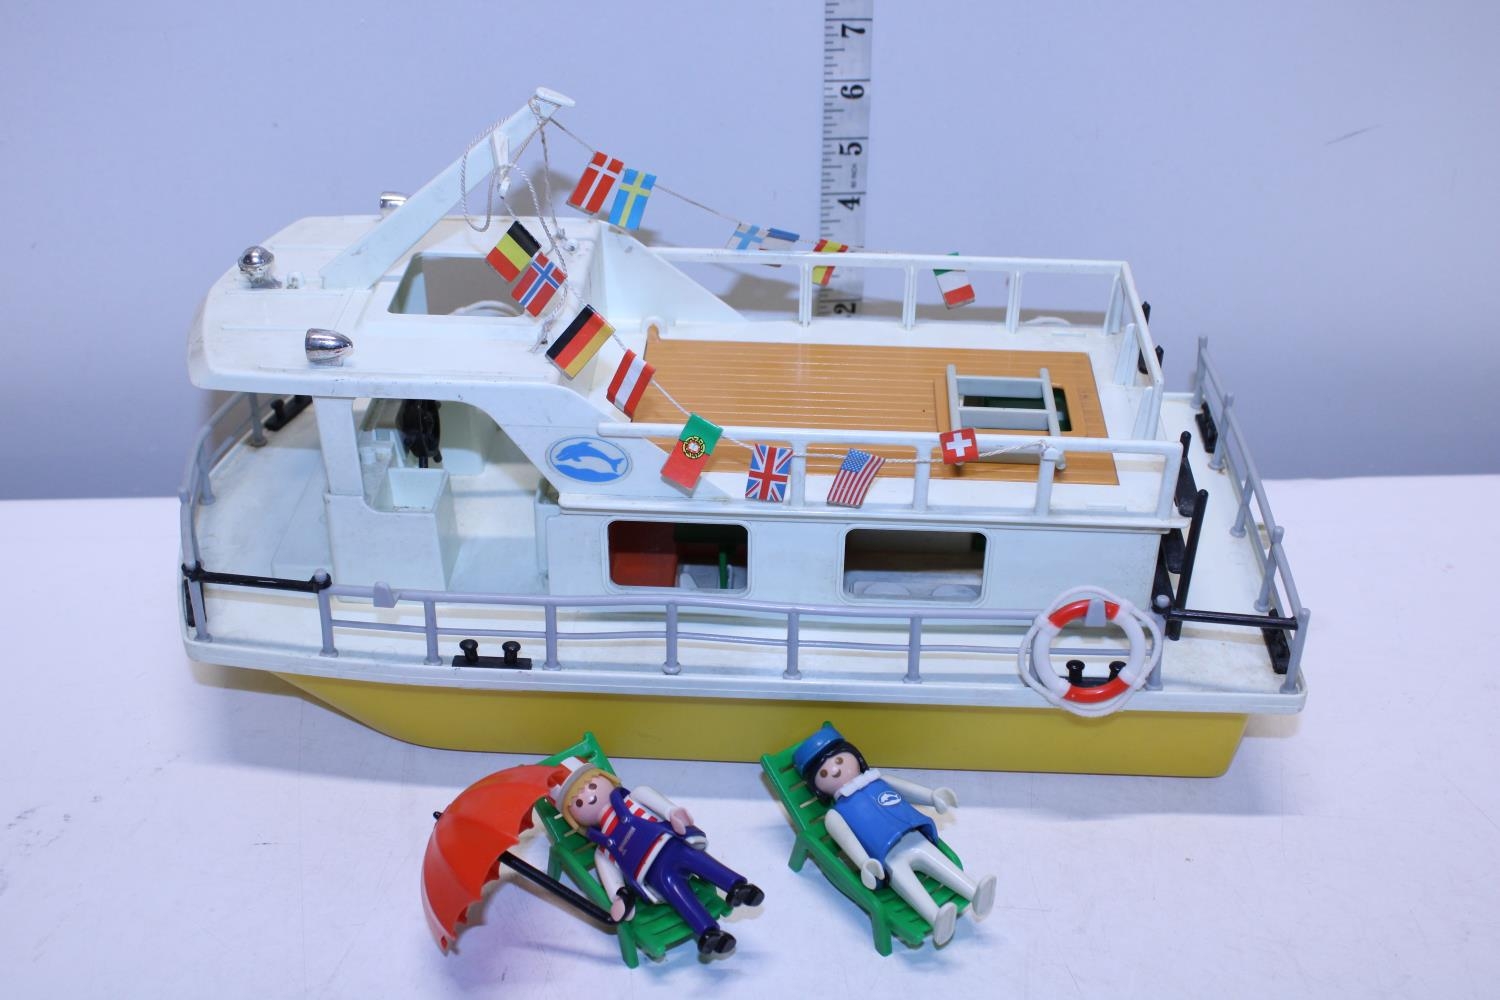 A Playmobil boat and figures